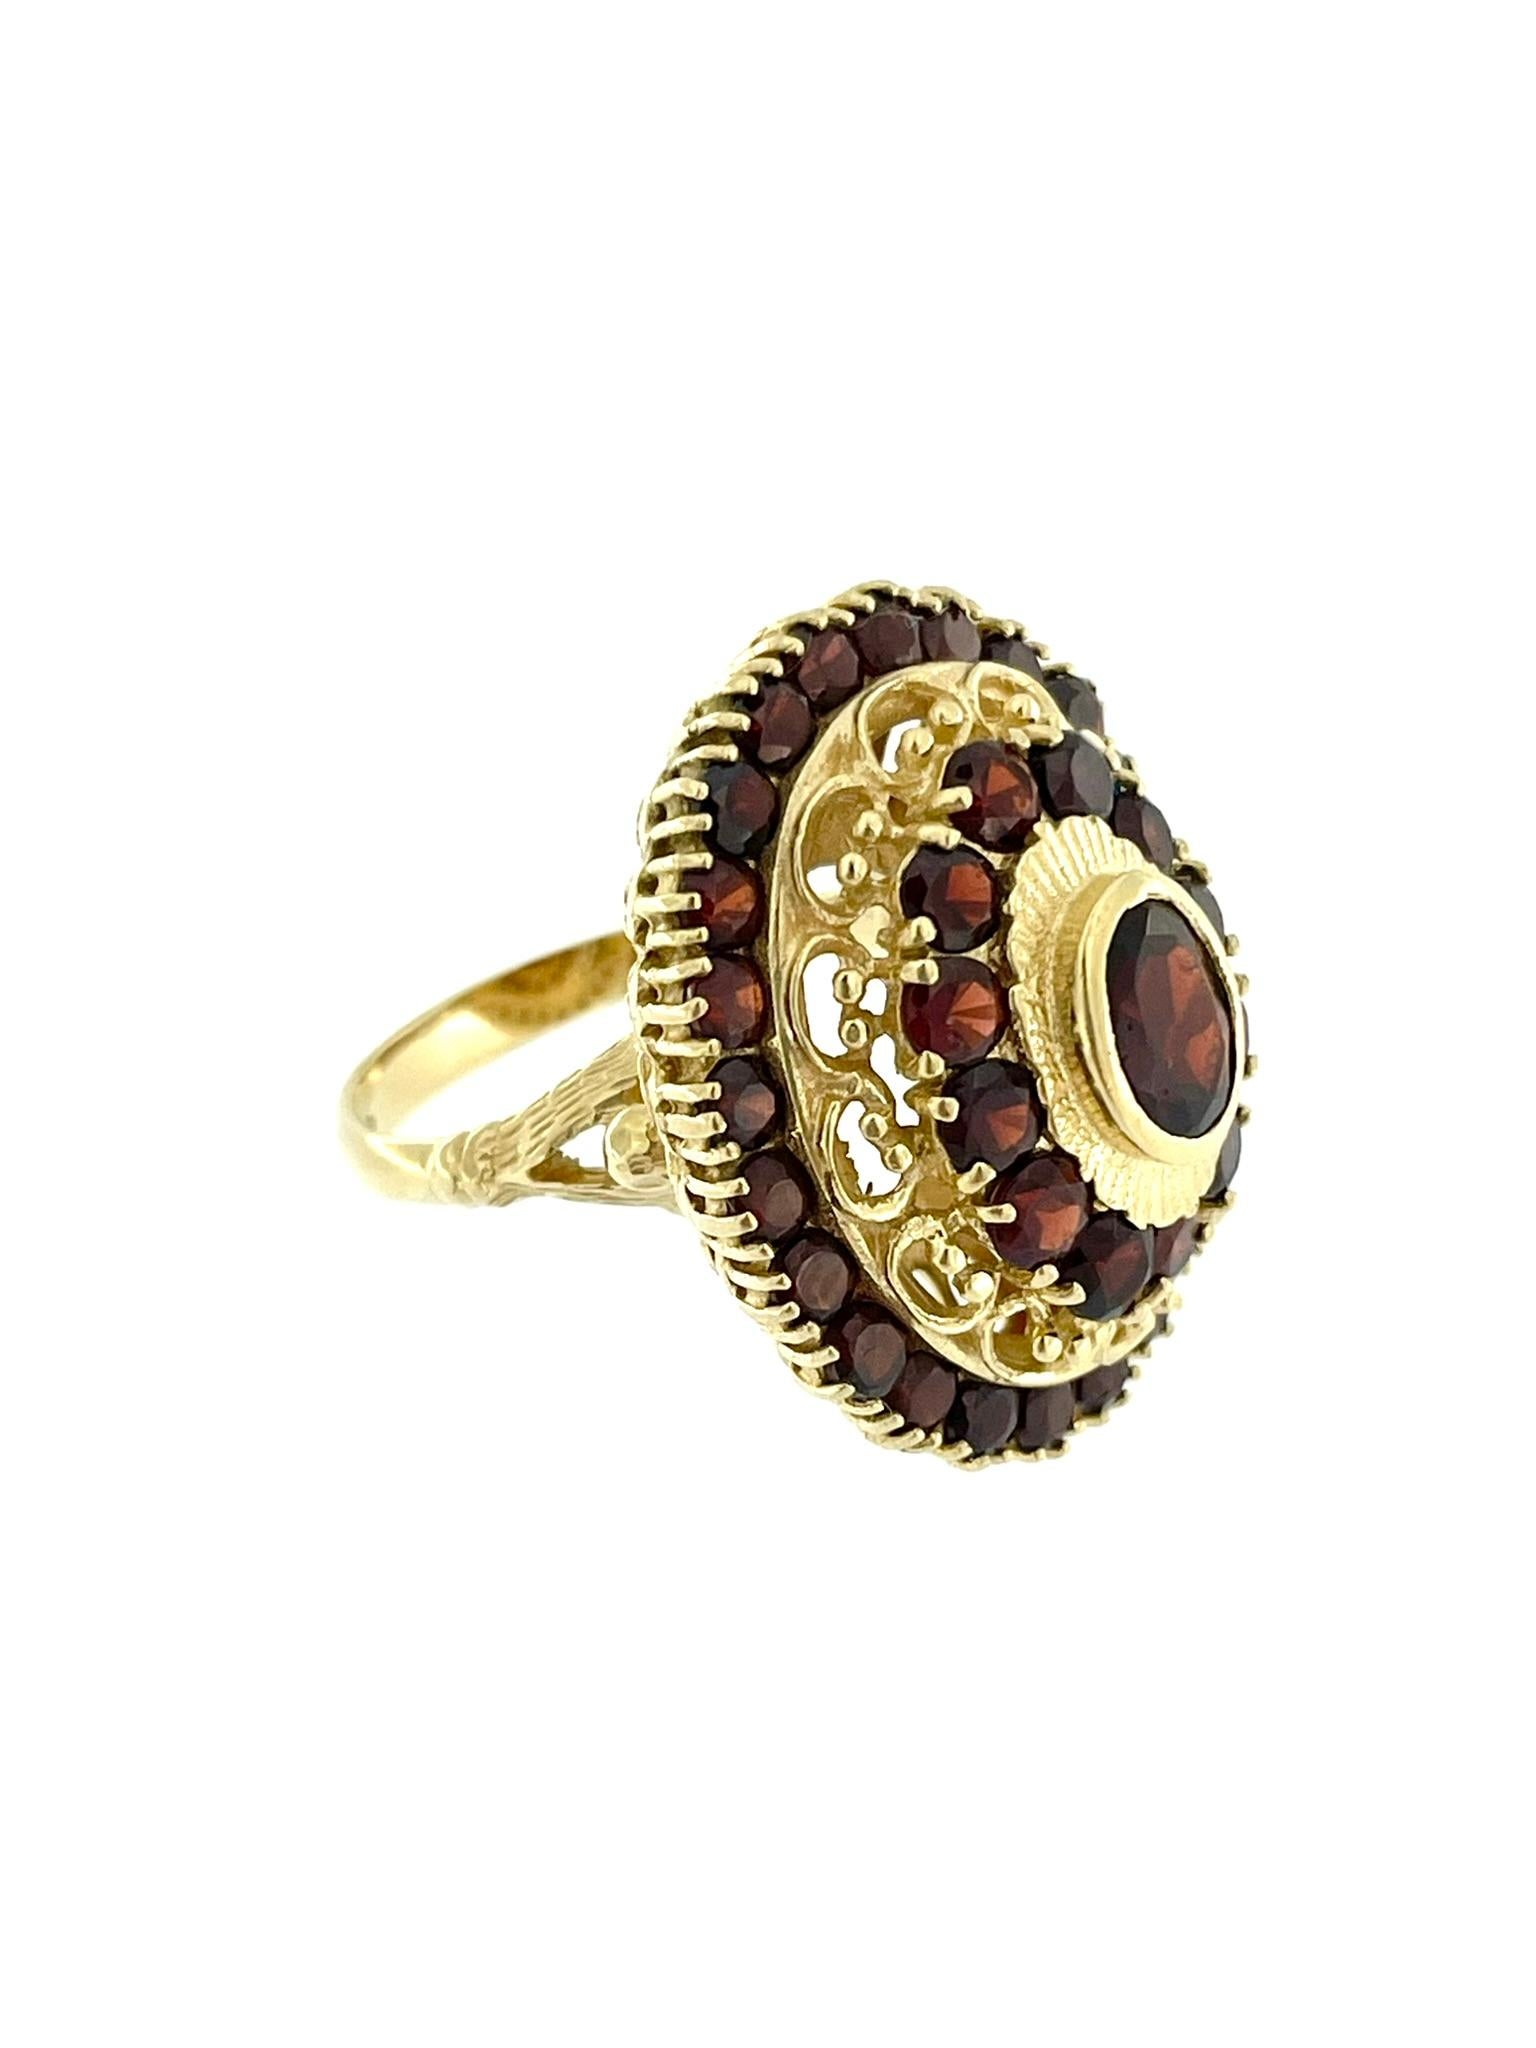 Belle-Epoque 18 karat Yellow Gold Princess Ring with Garnets For Sale 2